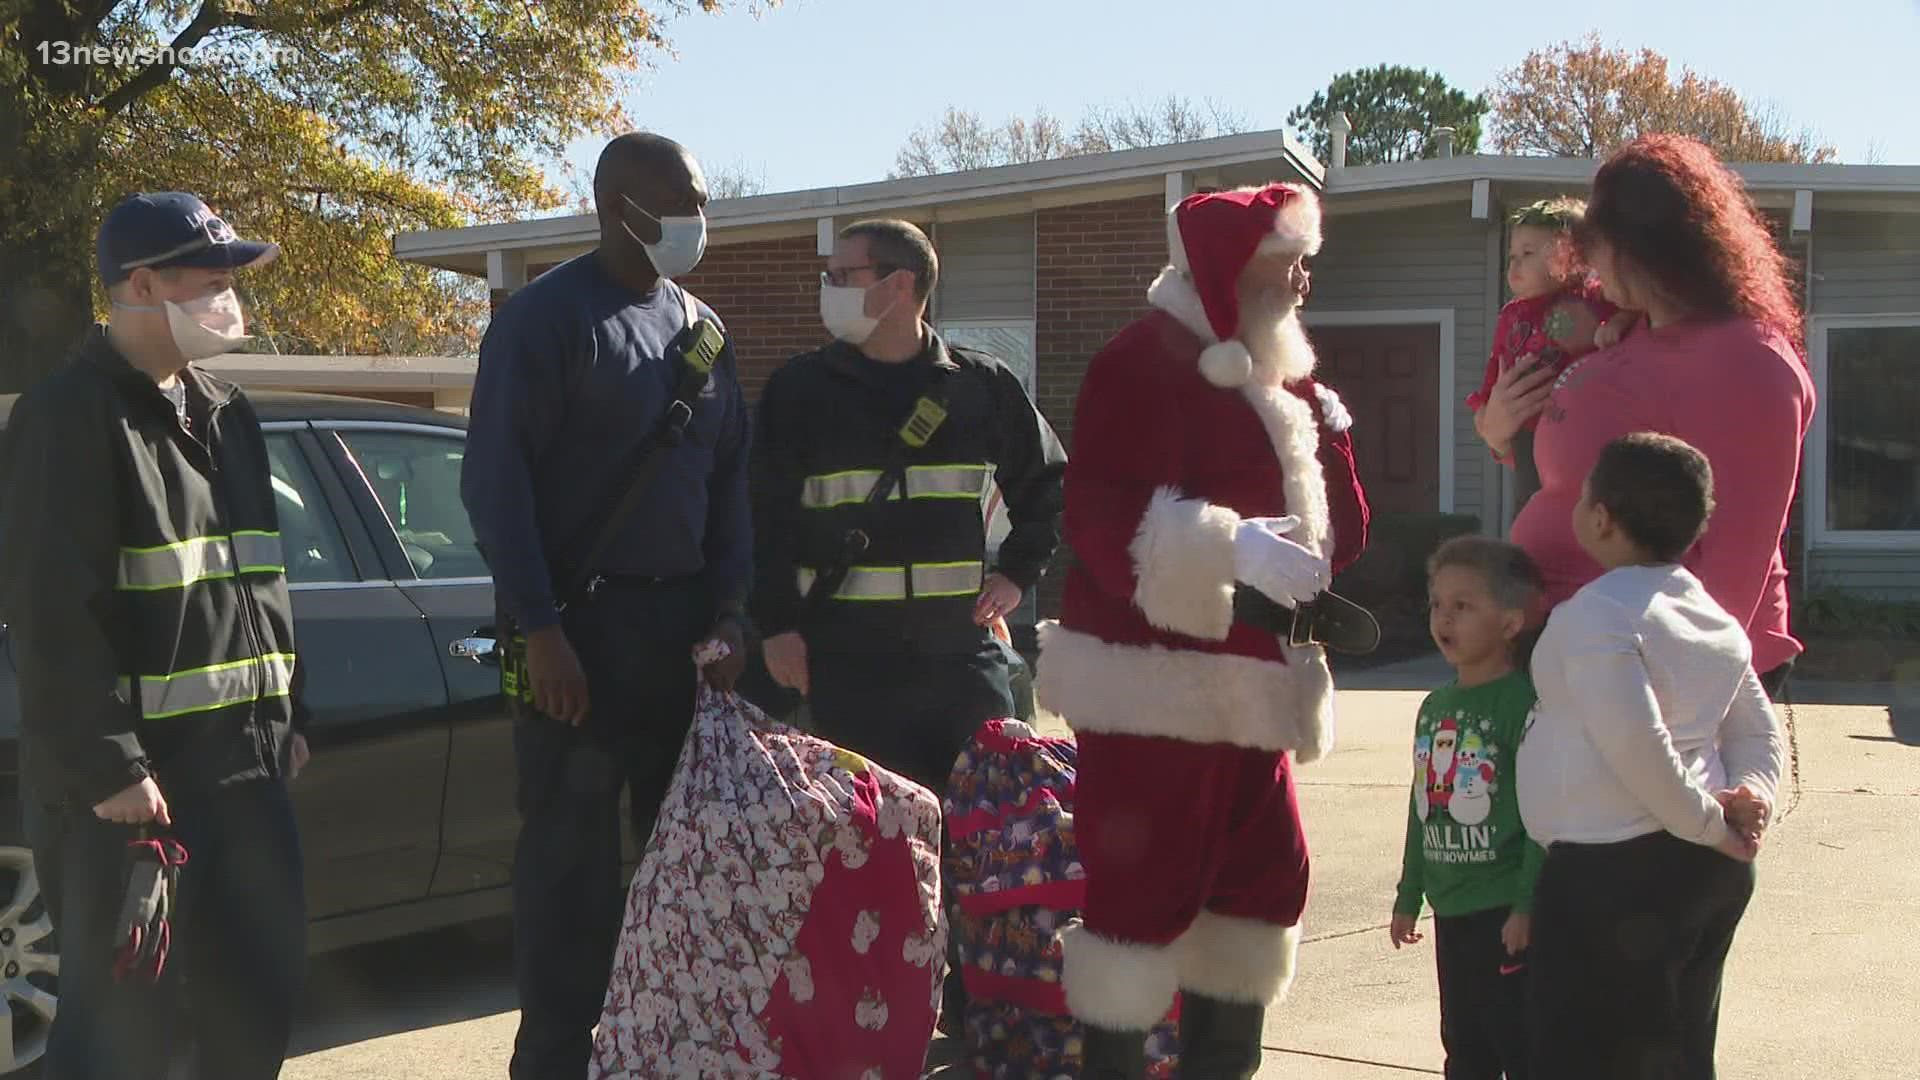 After taking a year off because of the pandemic, the Edmarc Santa Run is back. Eighty families across all seven cities got a visit from Santa and gifts.